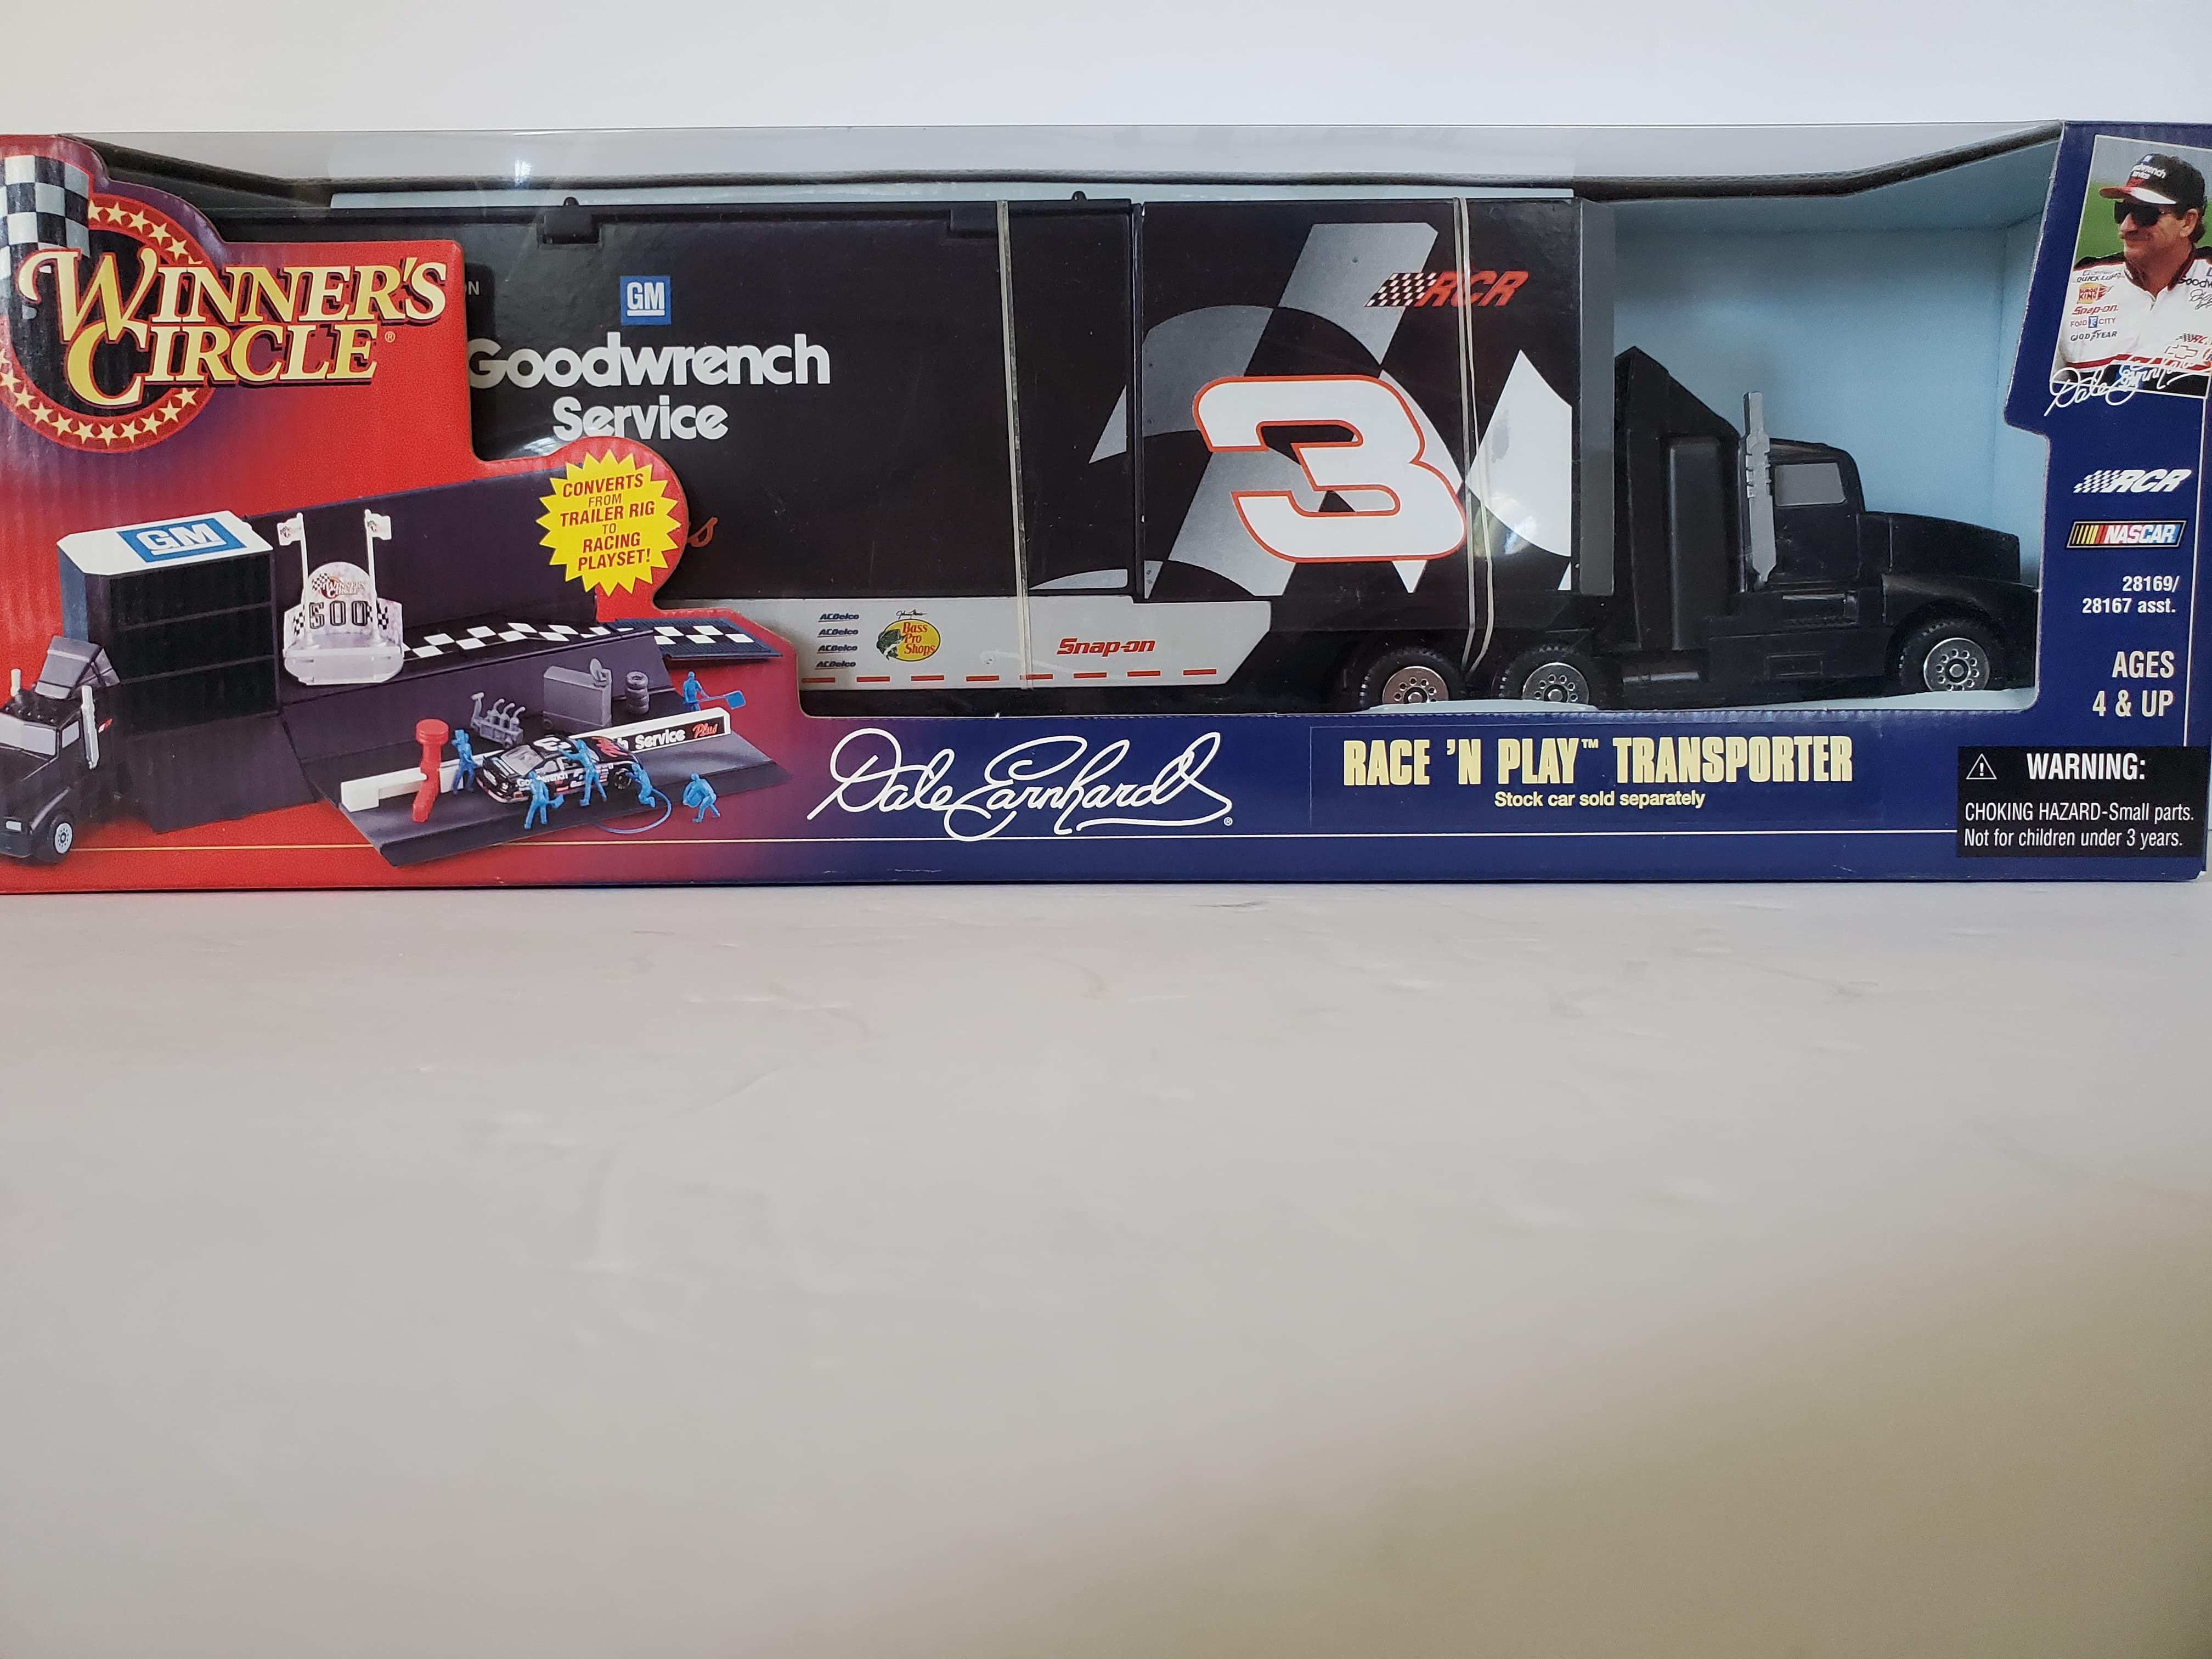 1998 WINNERS CIRCLE 1:43 SCALE #3 RACE N PLAY TRANSPORTER-DALE EARNHARDT - Second hand - SH028